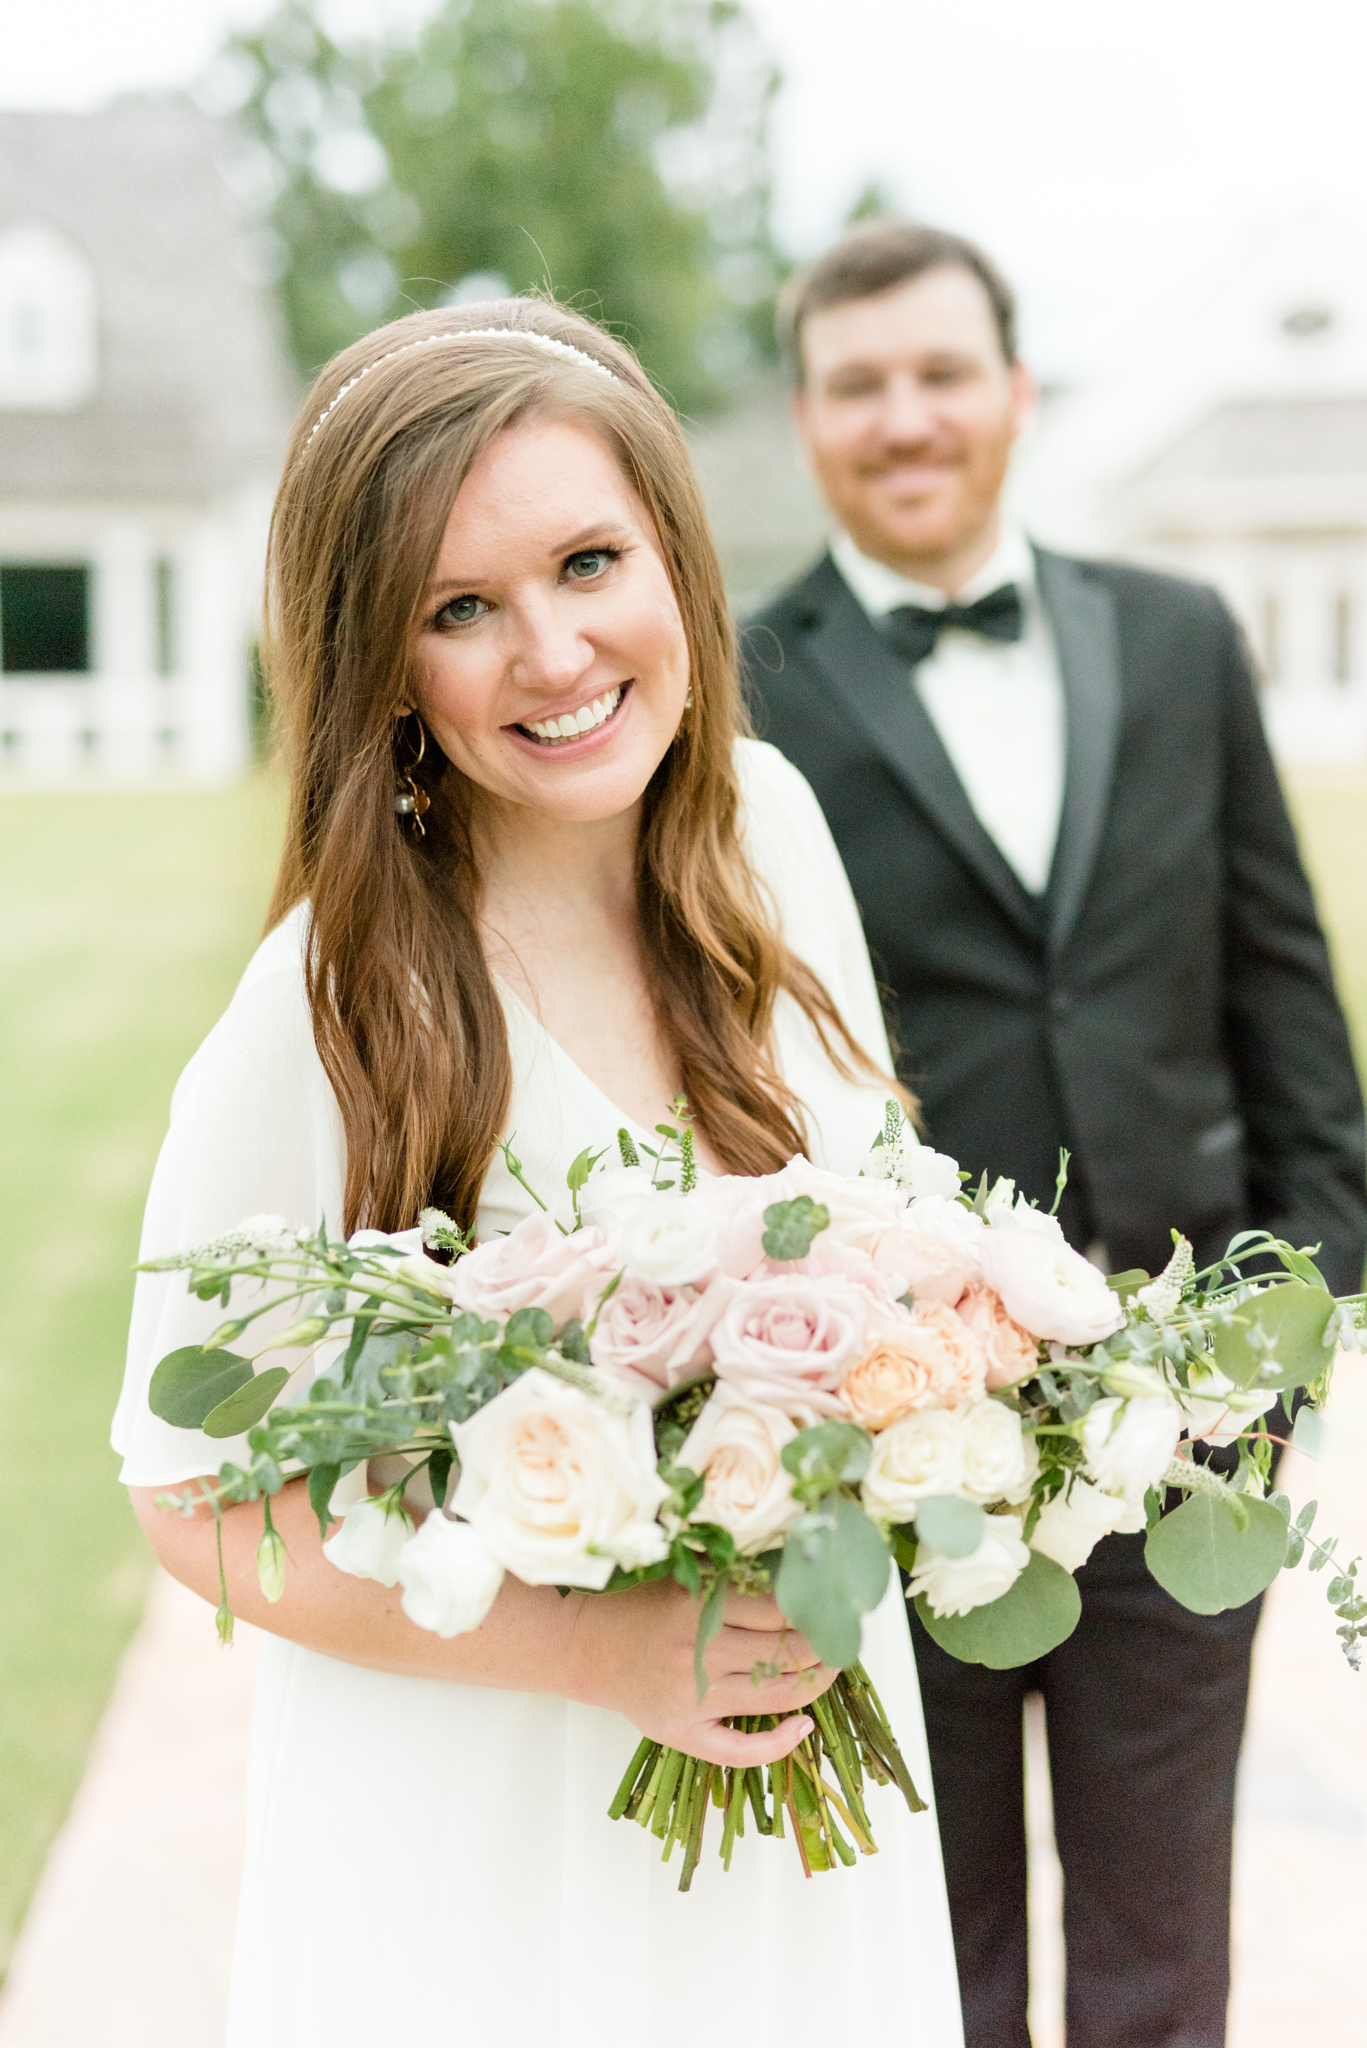 Bride leans towards camera and smiles while holding groom's hand.